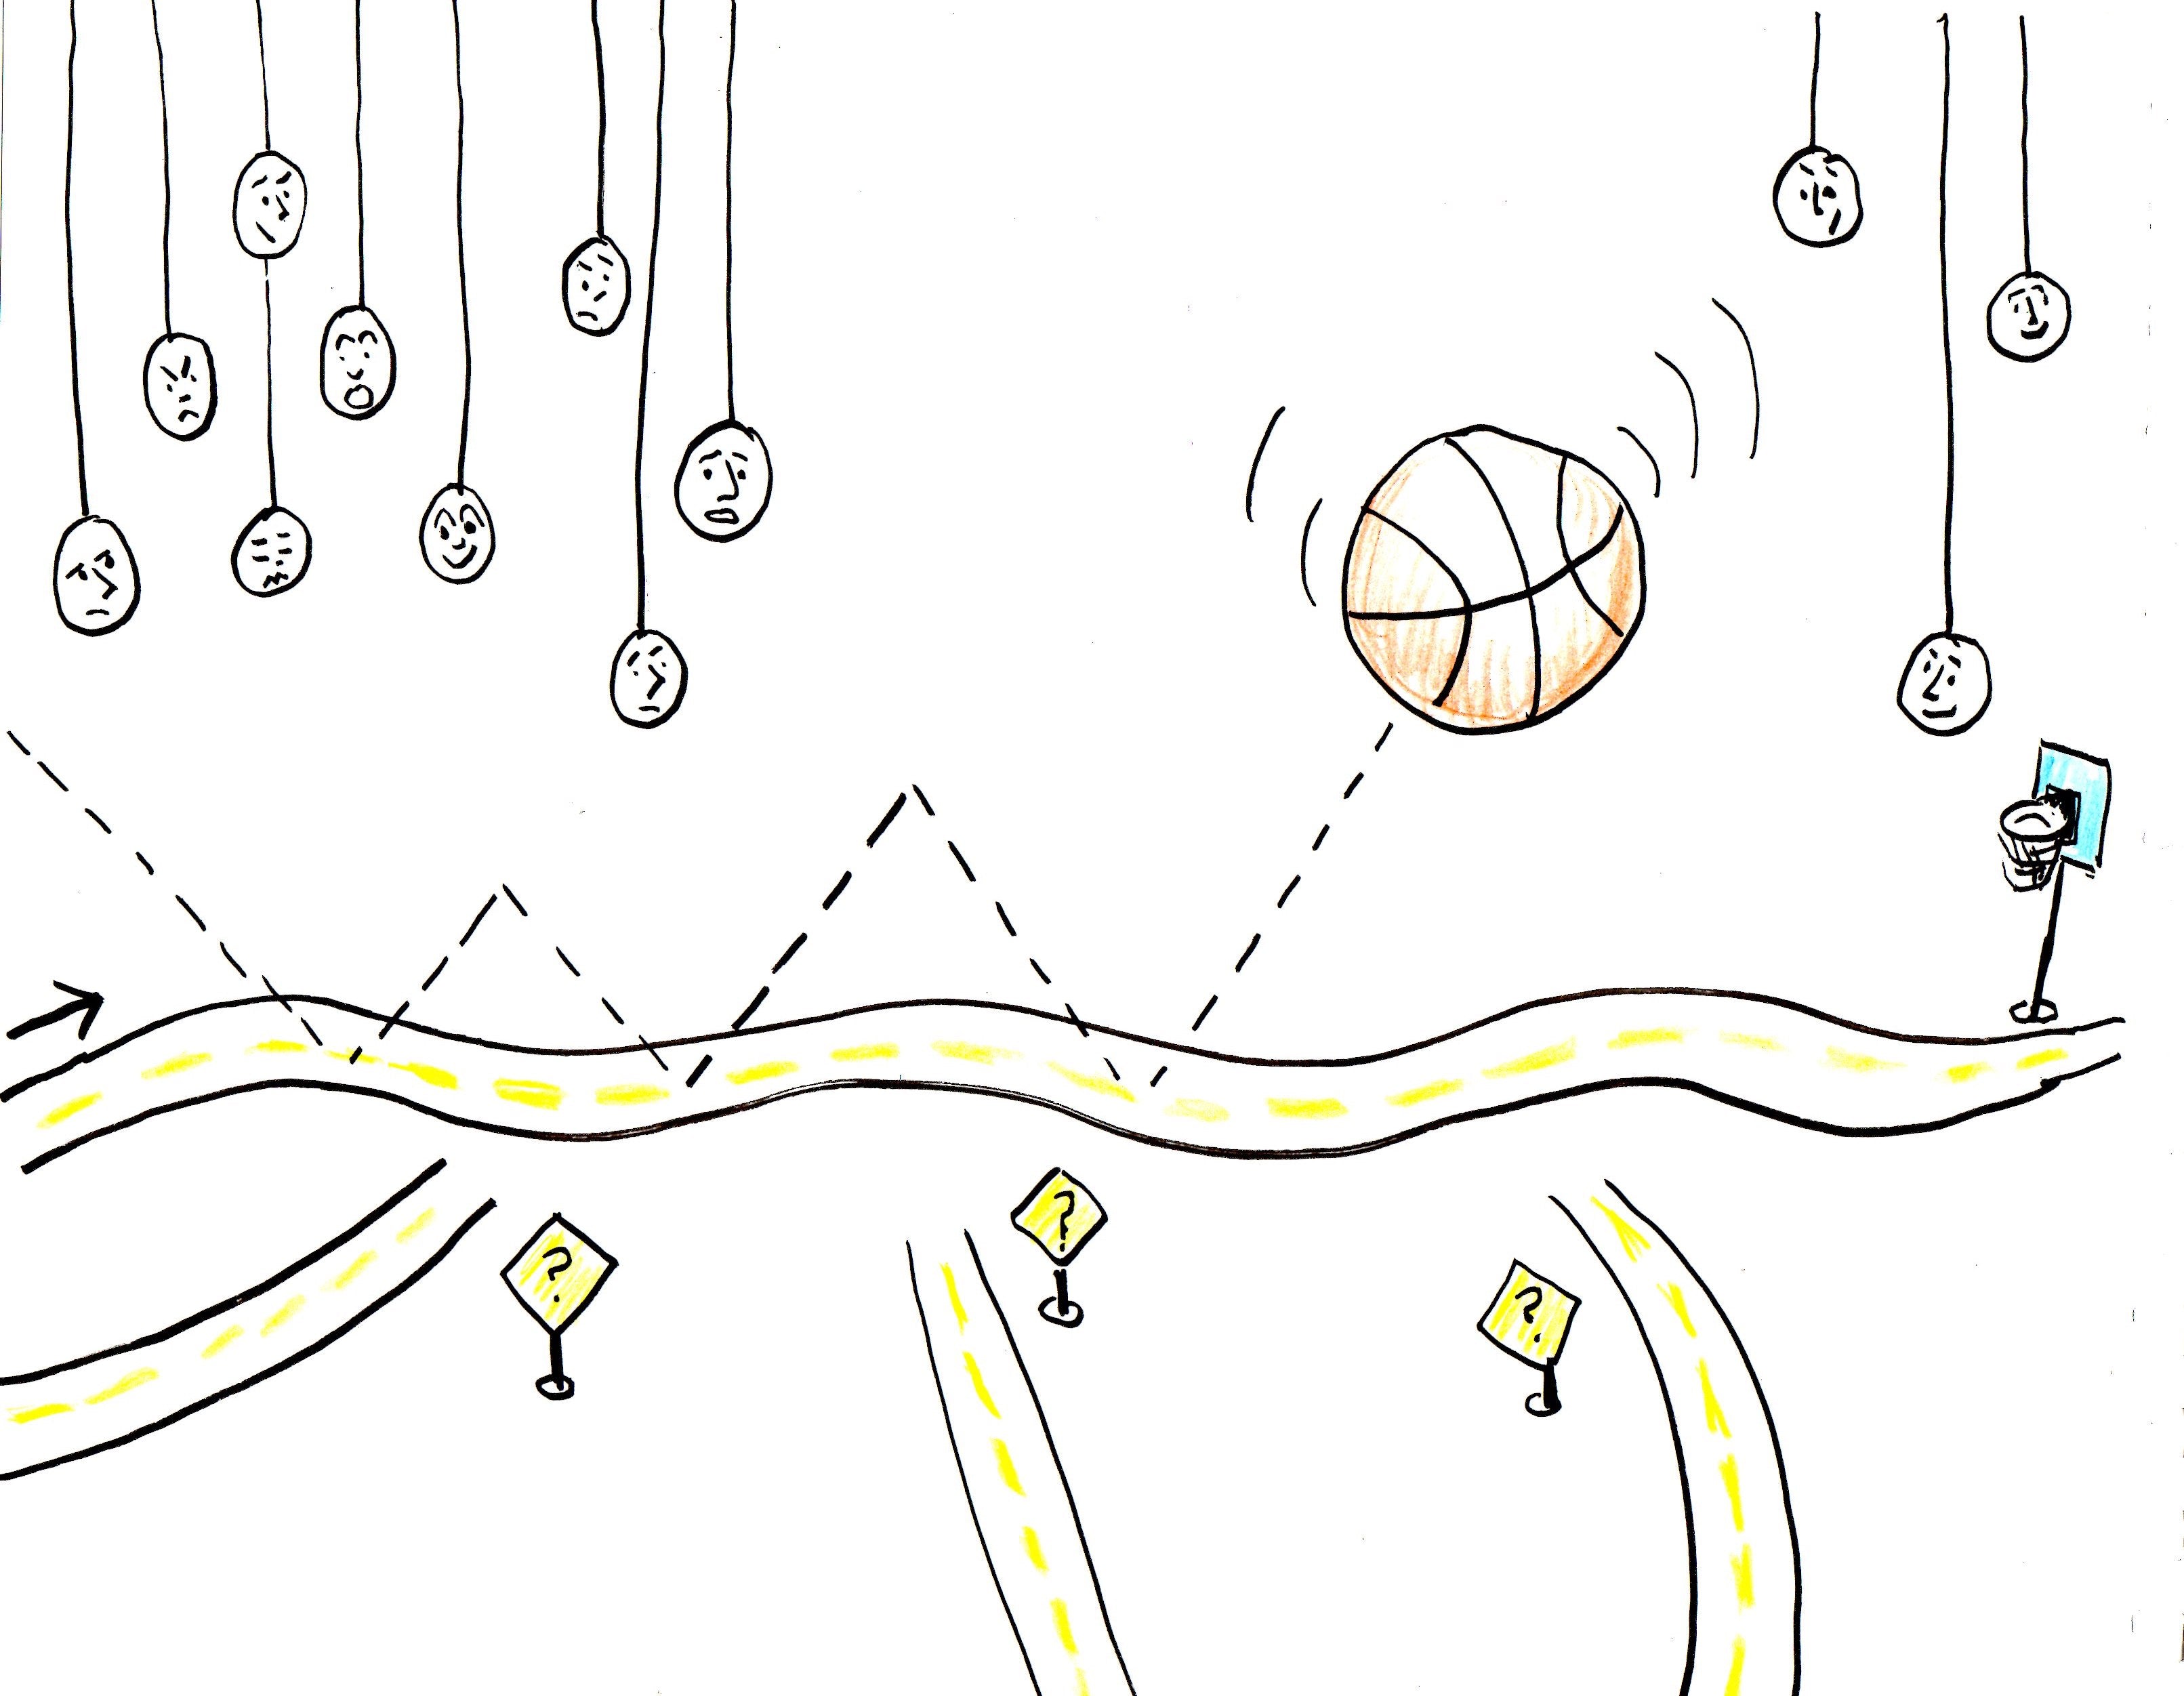 An illustration of a curving road with a basketball surrounded by faces expressing various emotions.